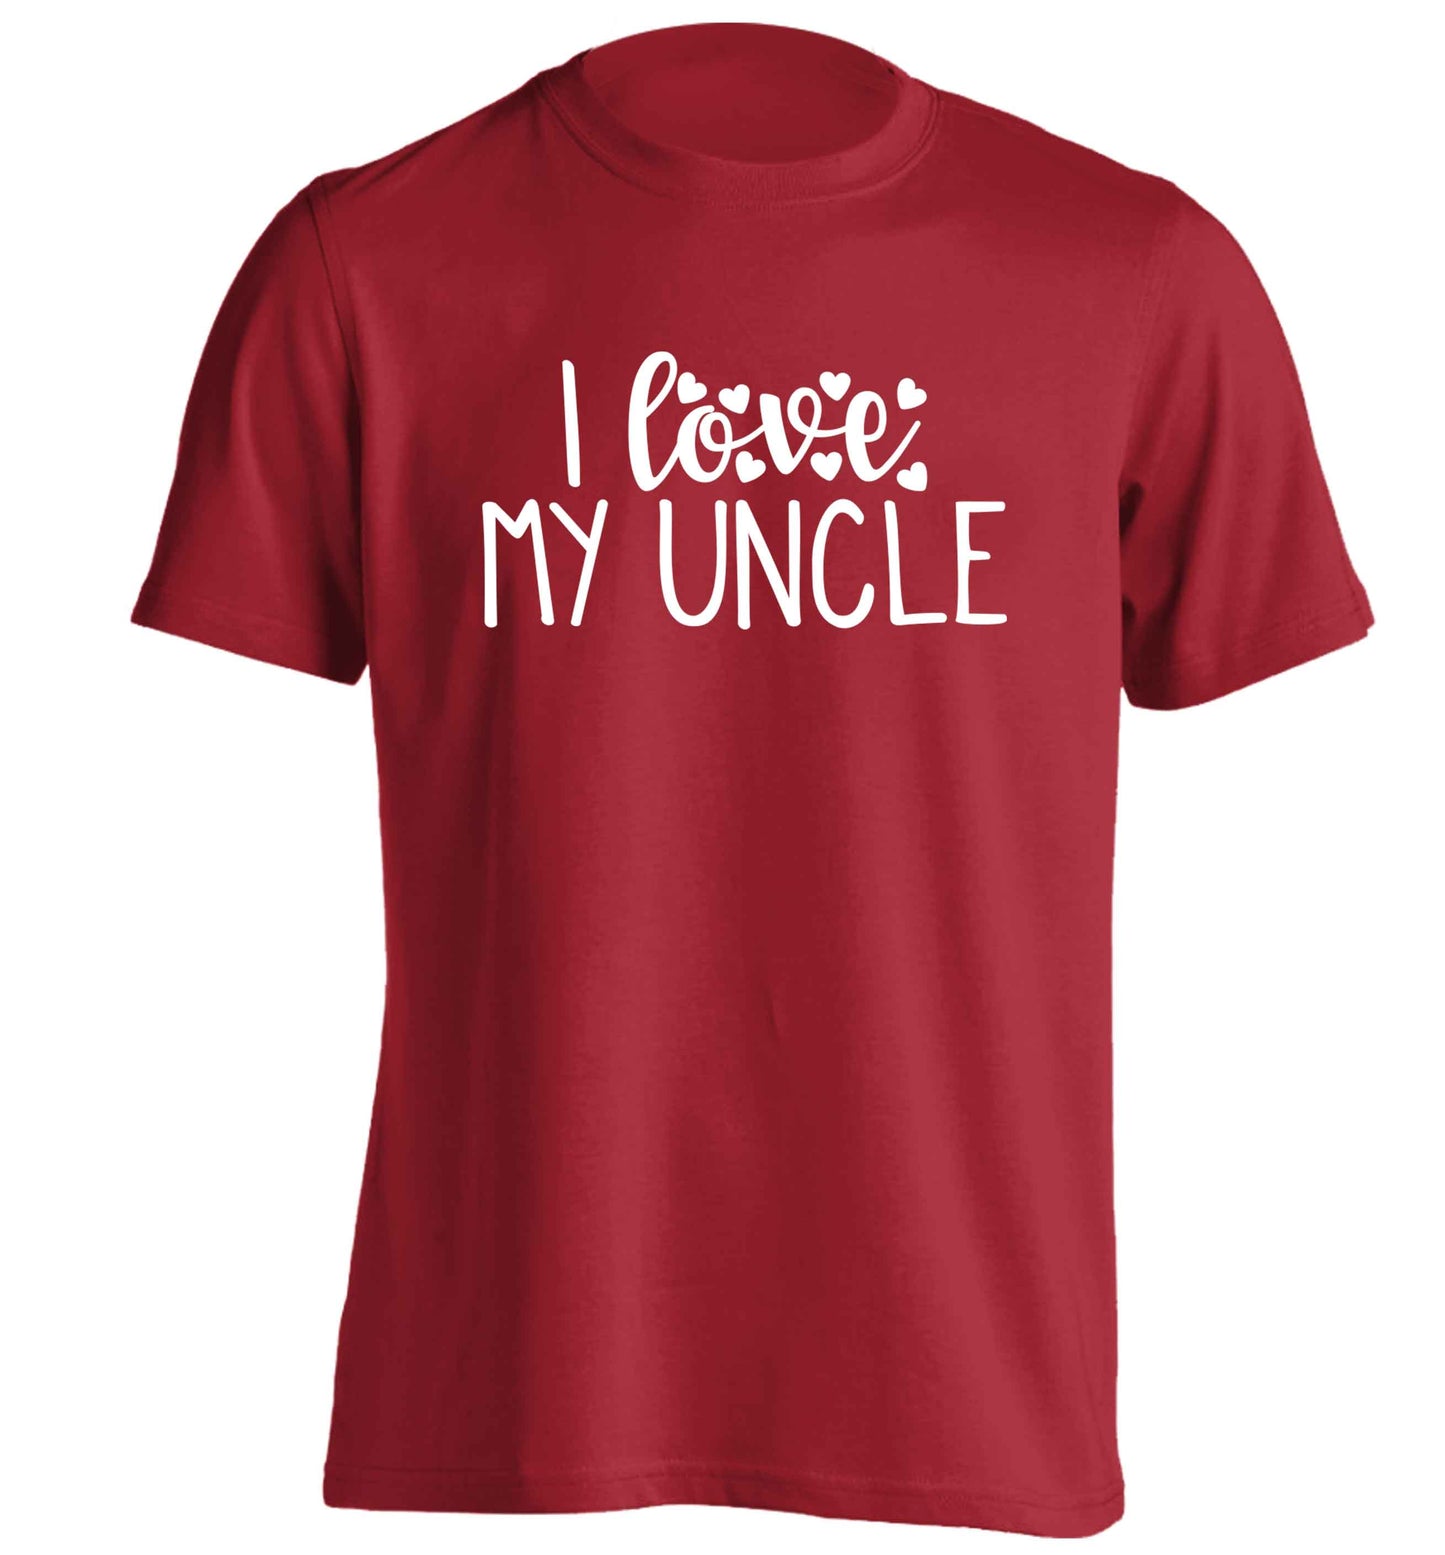 I love my uncle adults unisex red Tshirt 2XL